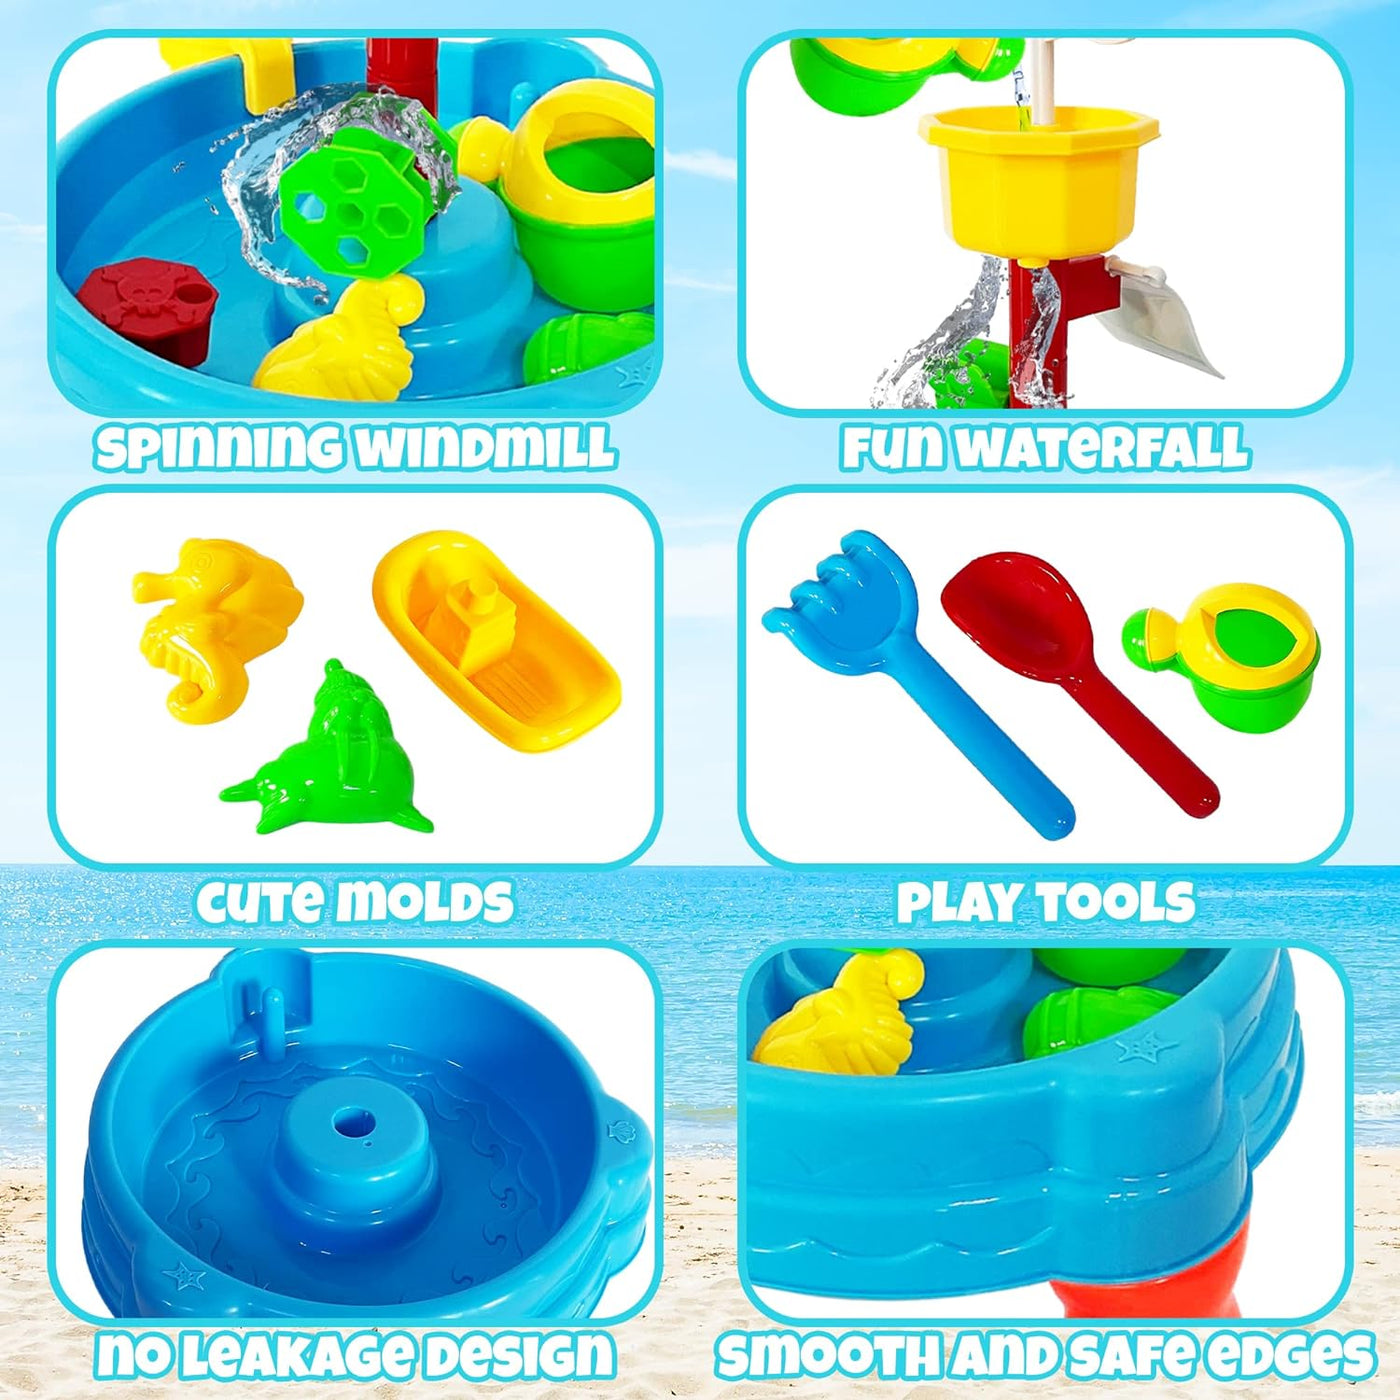 2 in 1 Sand & Water Table for Kids, Water Pool Table with Accessories for Toddlers, Sensory Table for Sand & Water Play, Beach Sand Toys, Summer Activity Sandbox Toys for Boys & Girls